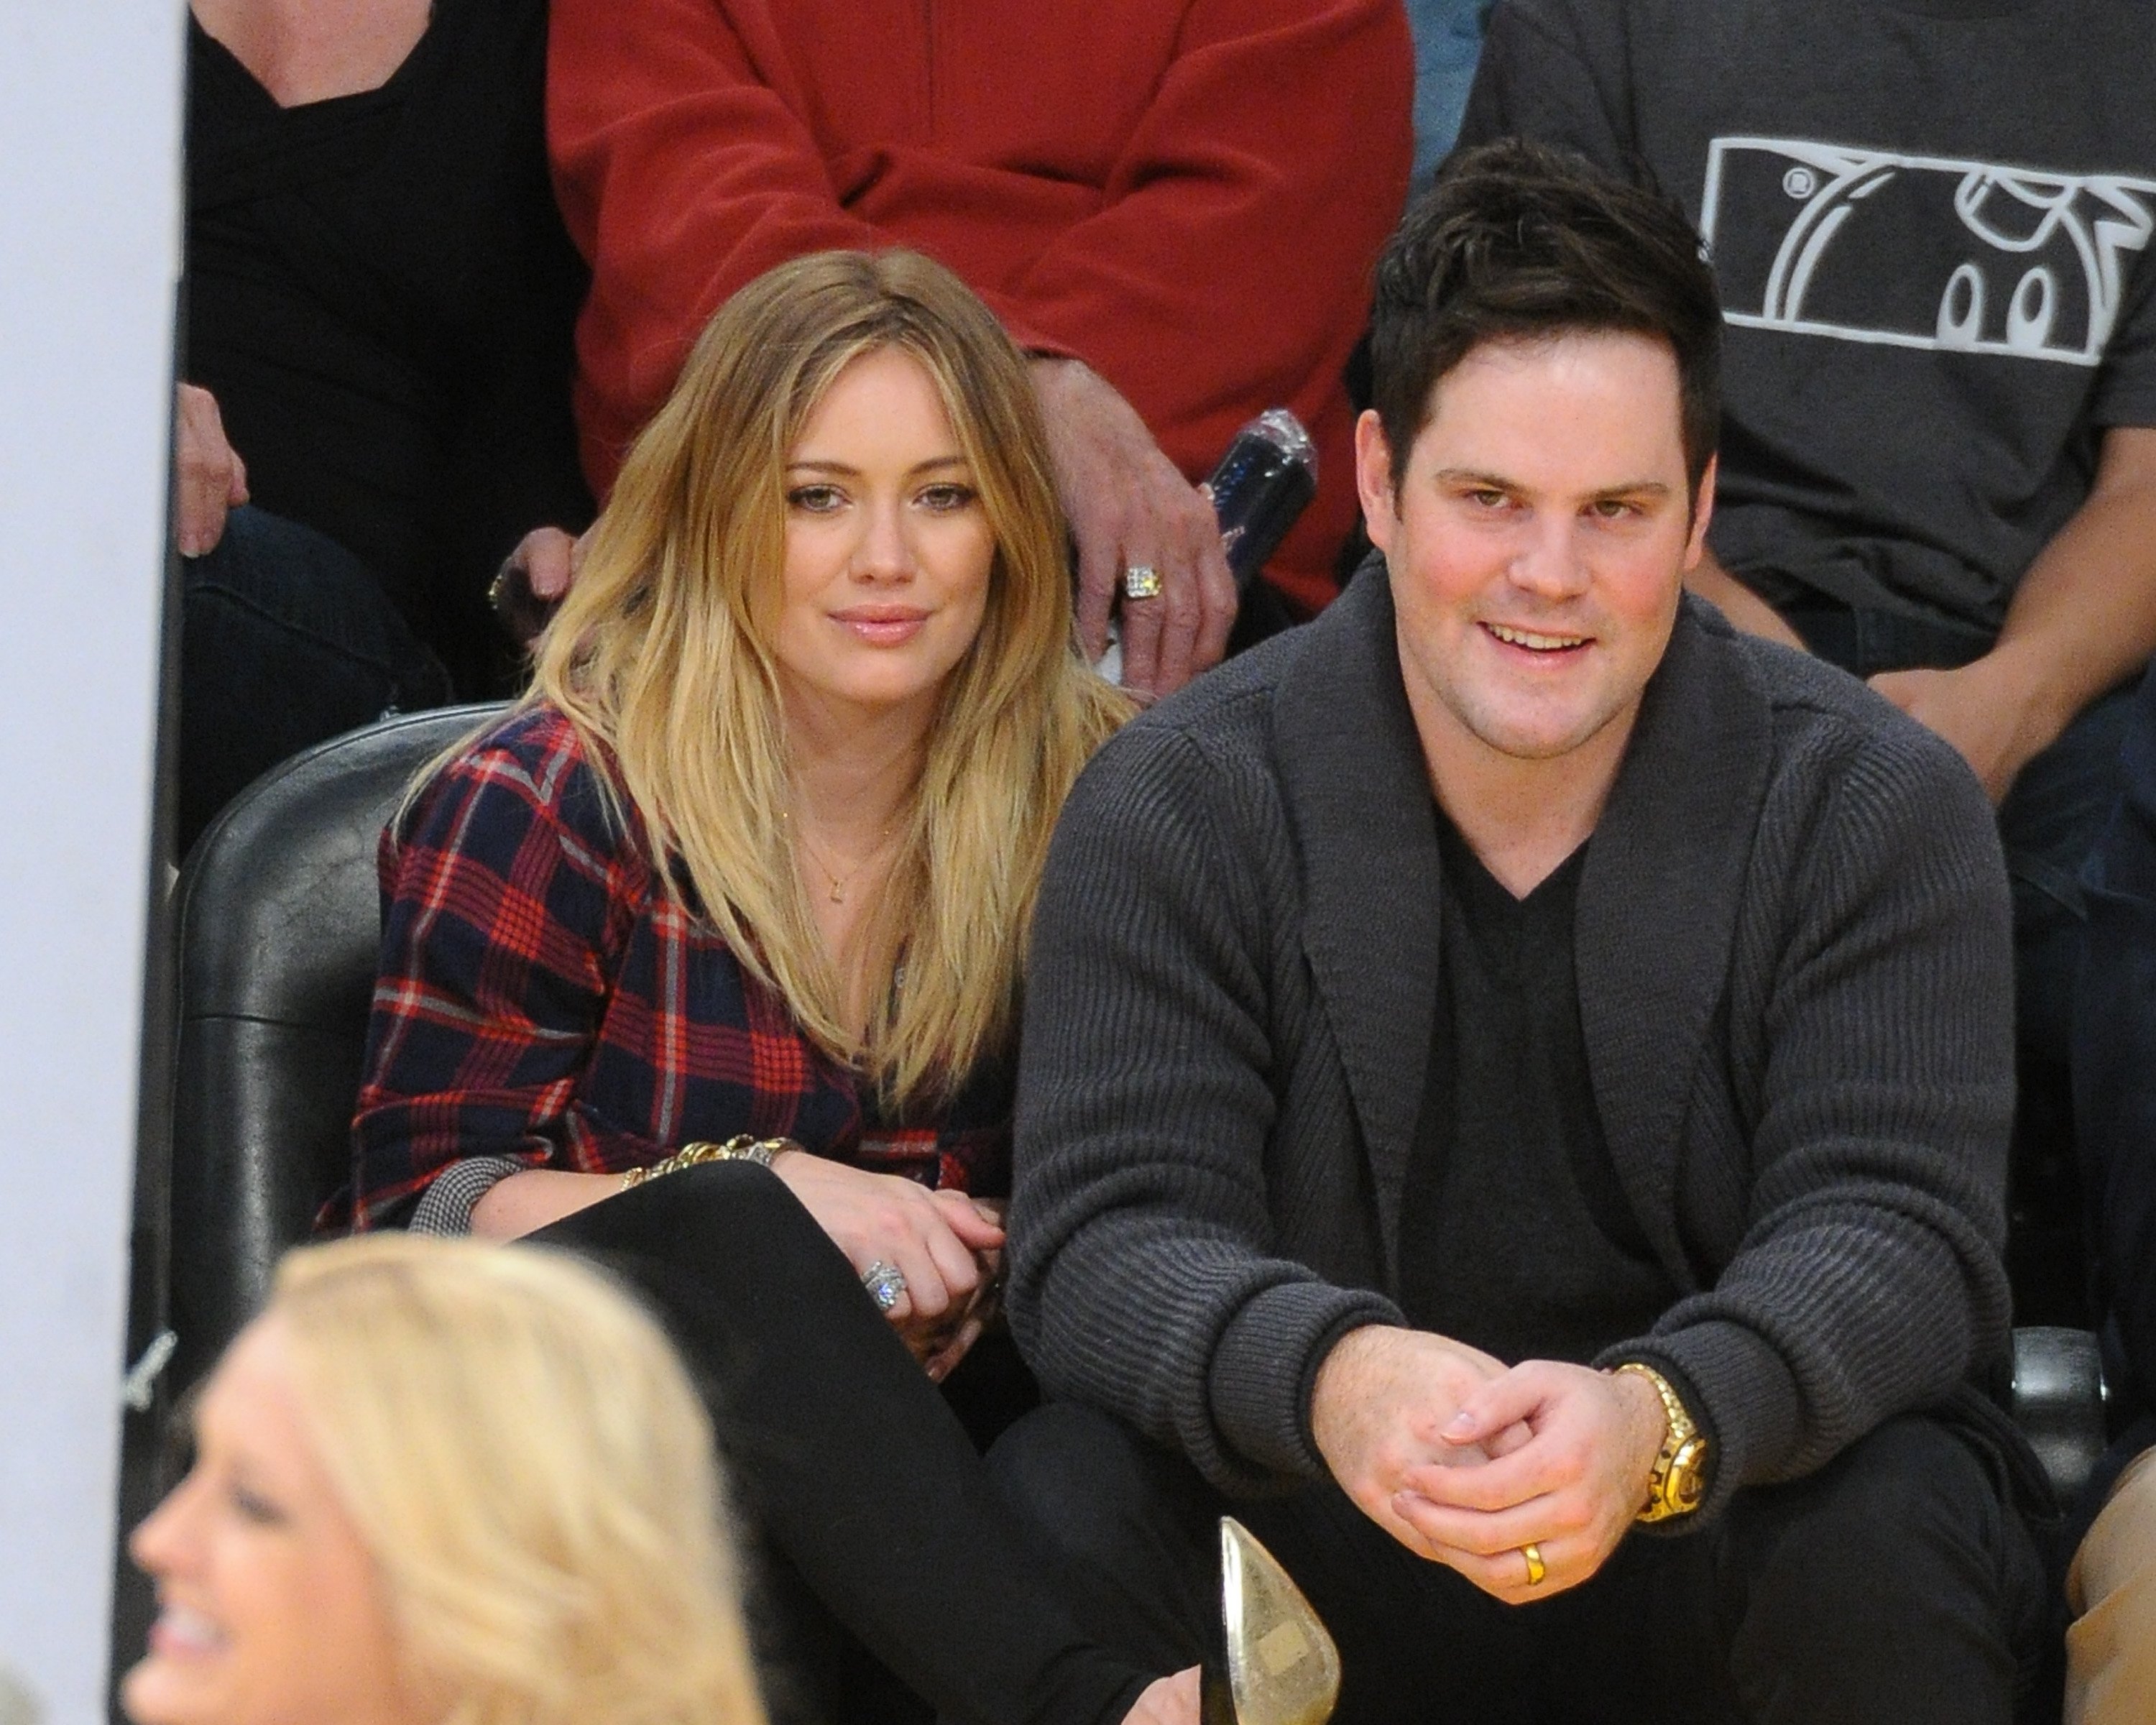 Hilary Duff and Mike Comrie at a basketball game on January 17, 2013. | Source: Getty Images